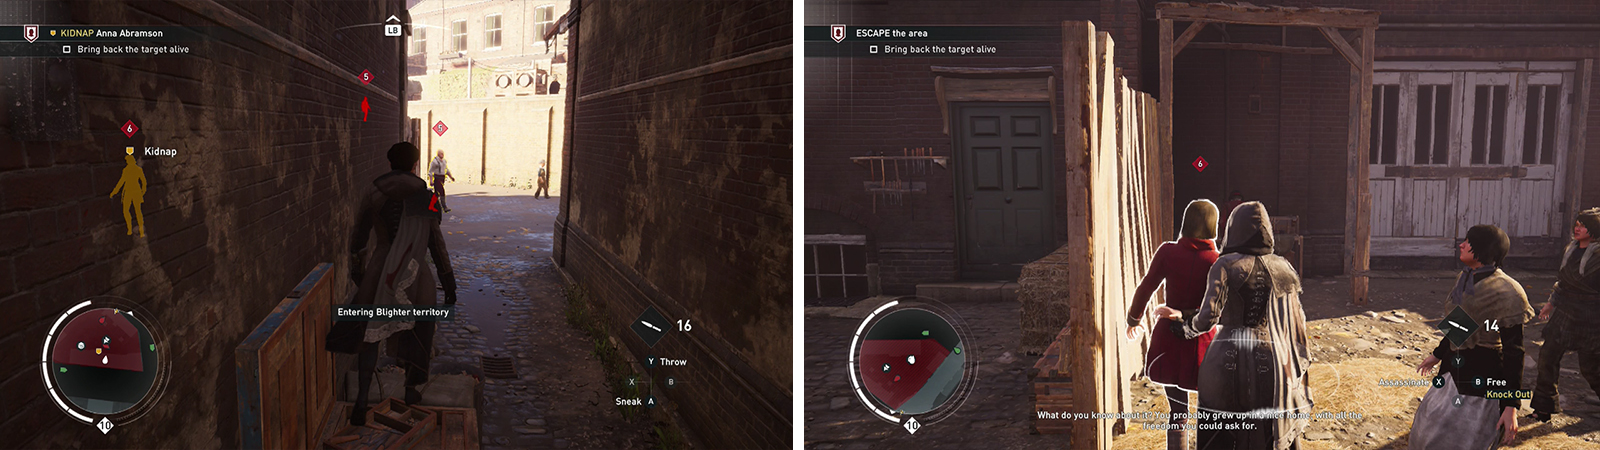 Hop over the wooden fence (left) and grab the target just to the left. Escort her from the area (right).